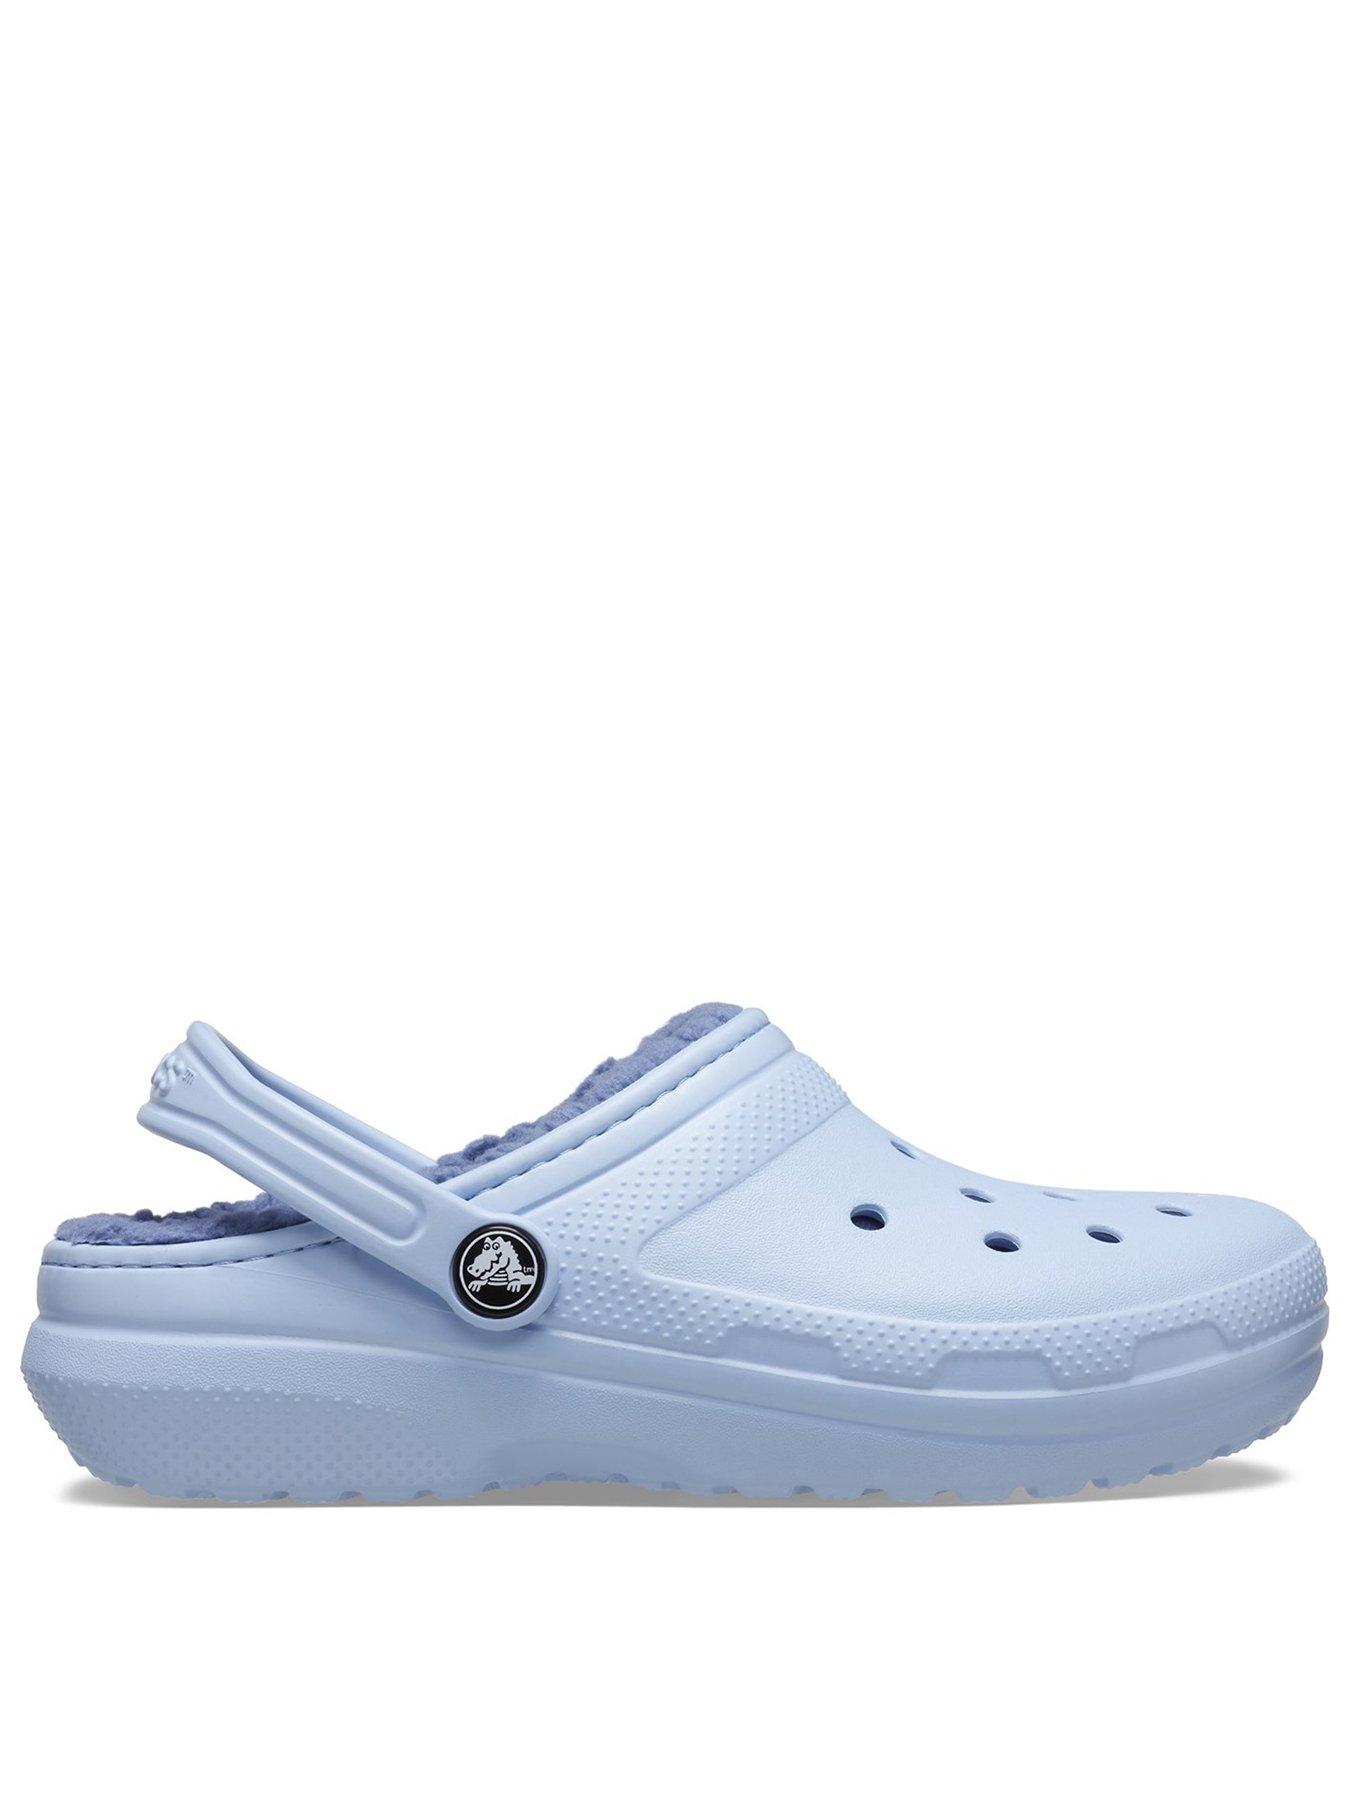 Crocs' Classic Cozzzy Sandals just launched, and we're in love